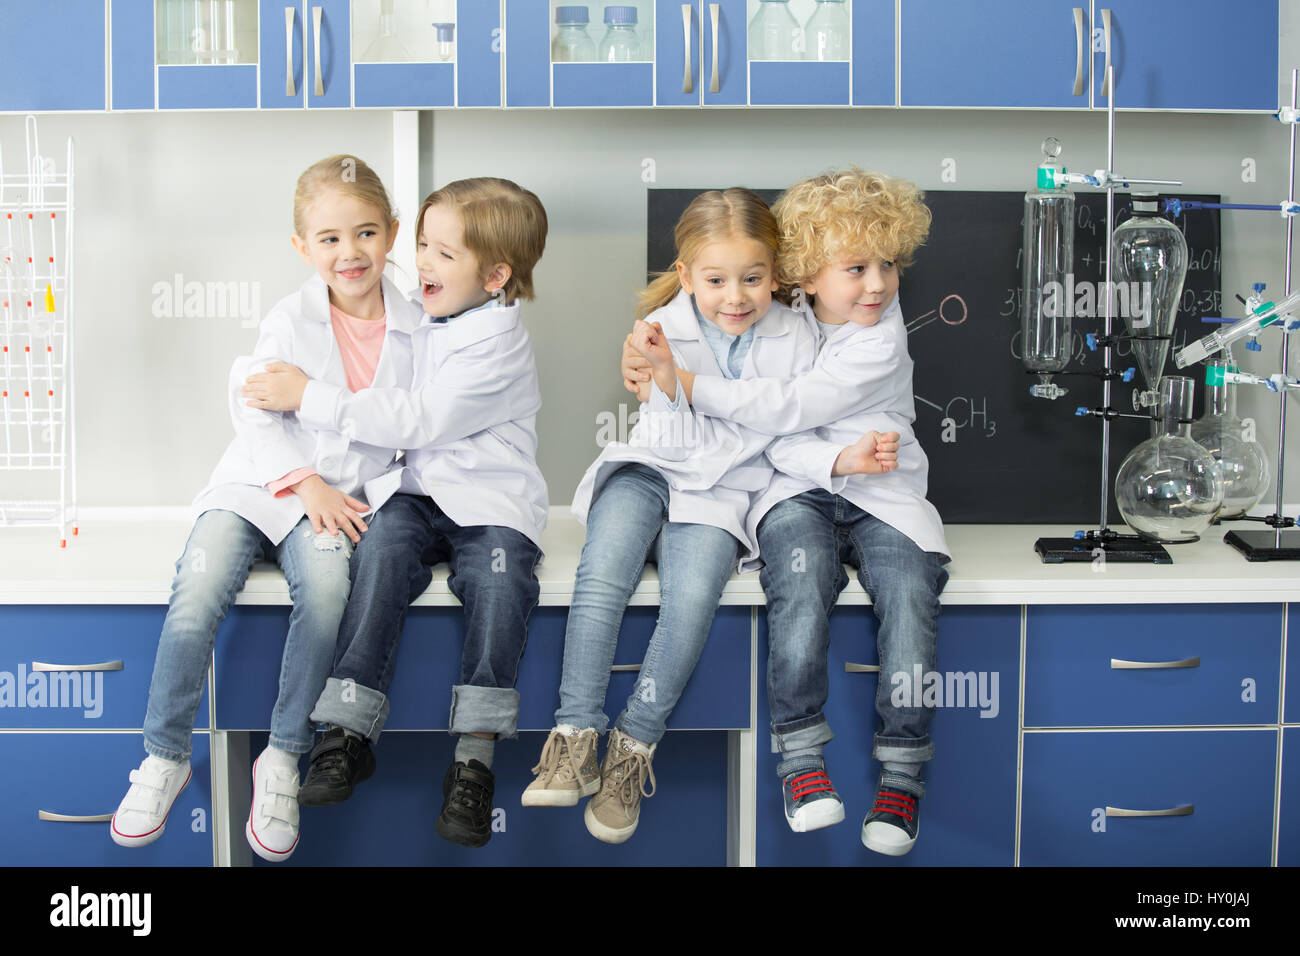 Schoolchildren in lab coats sitting together in chemical laboratory Stock Photo